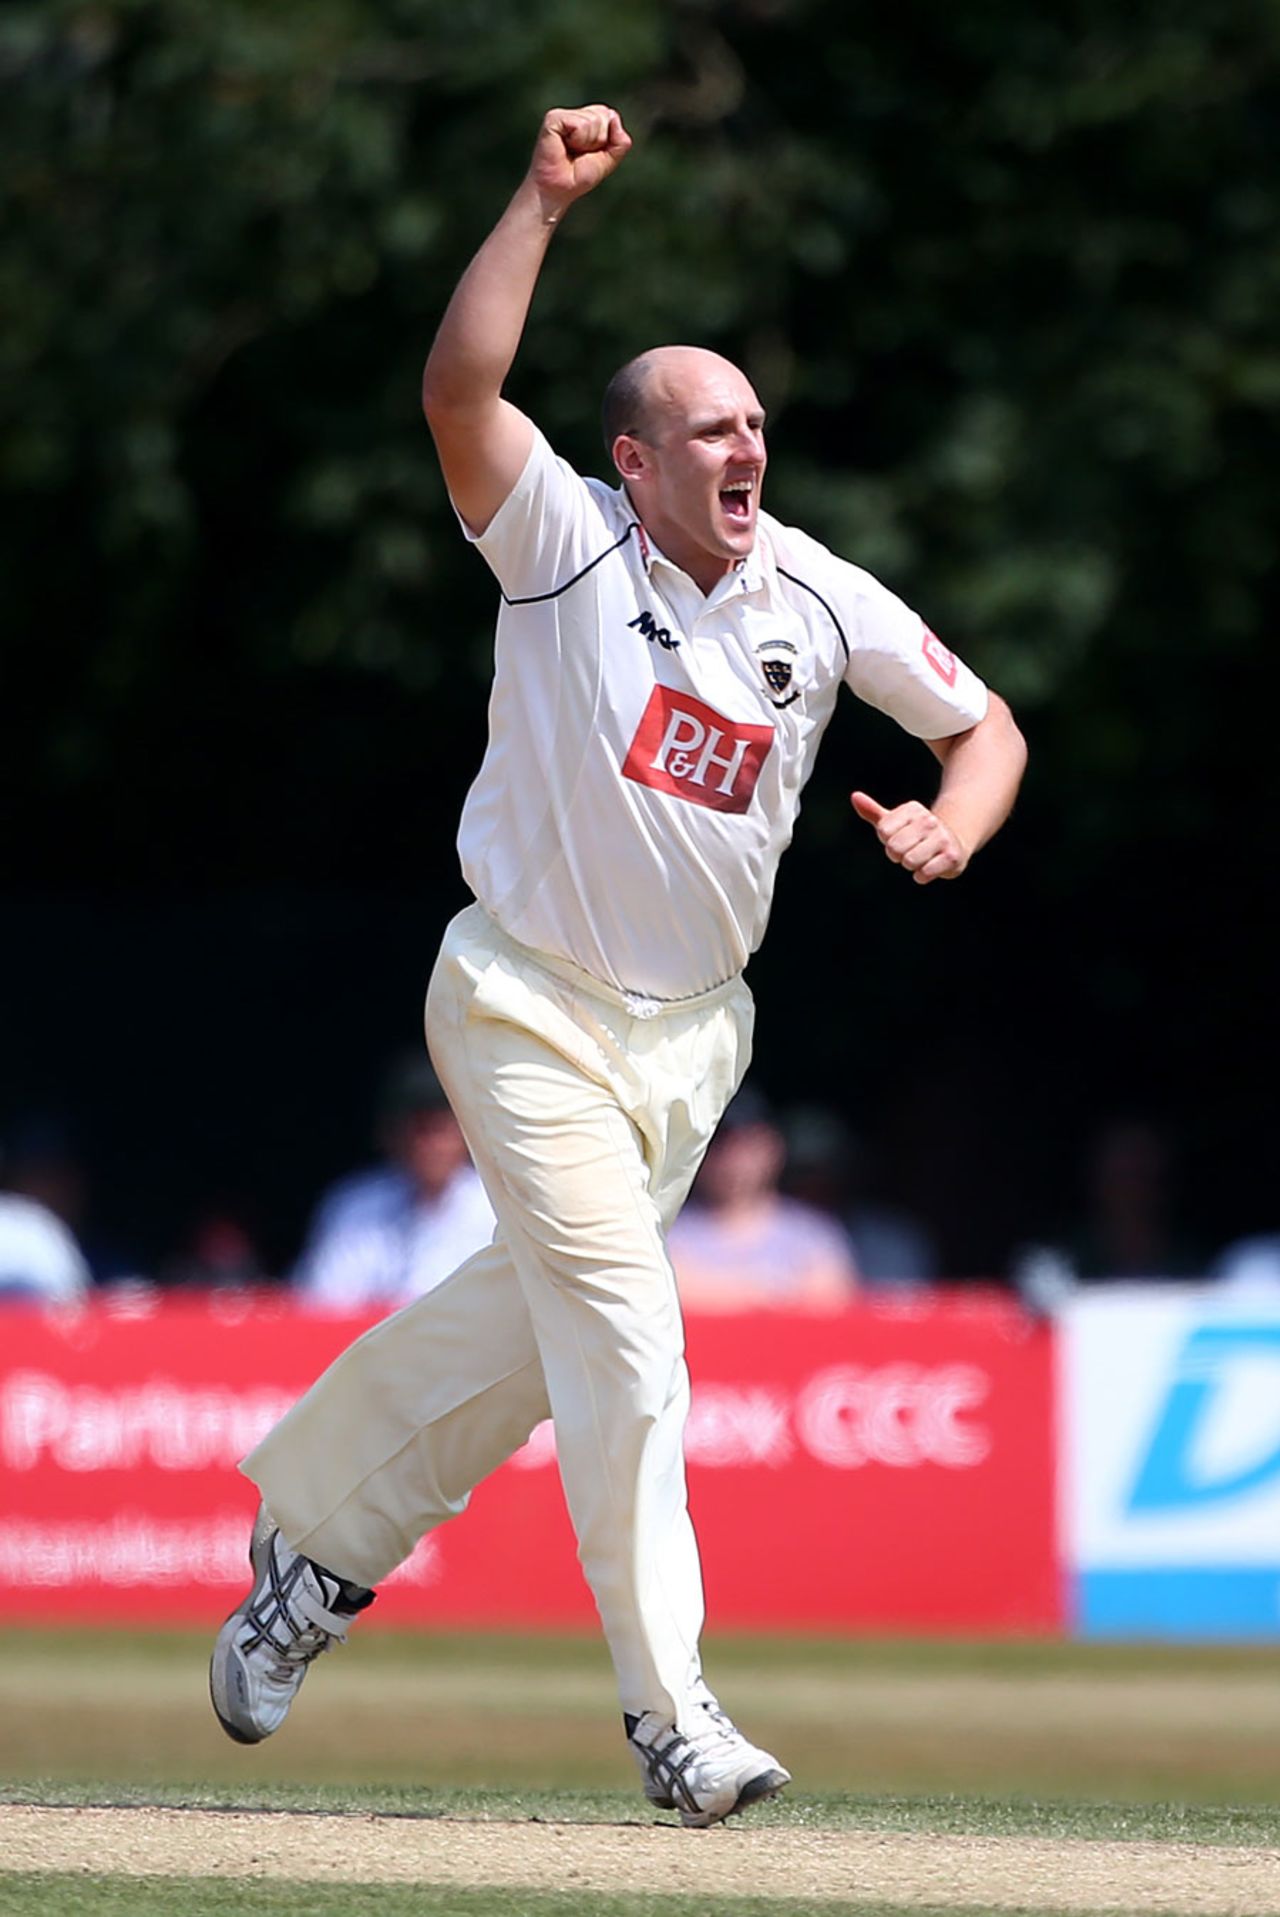 James Tredwell helped himself to 4 for 7, Sussex v Warwickshire, County Championship, Horsham, 4th day, July 24, 2014